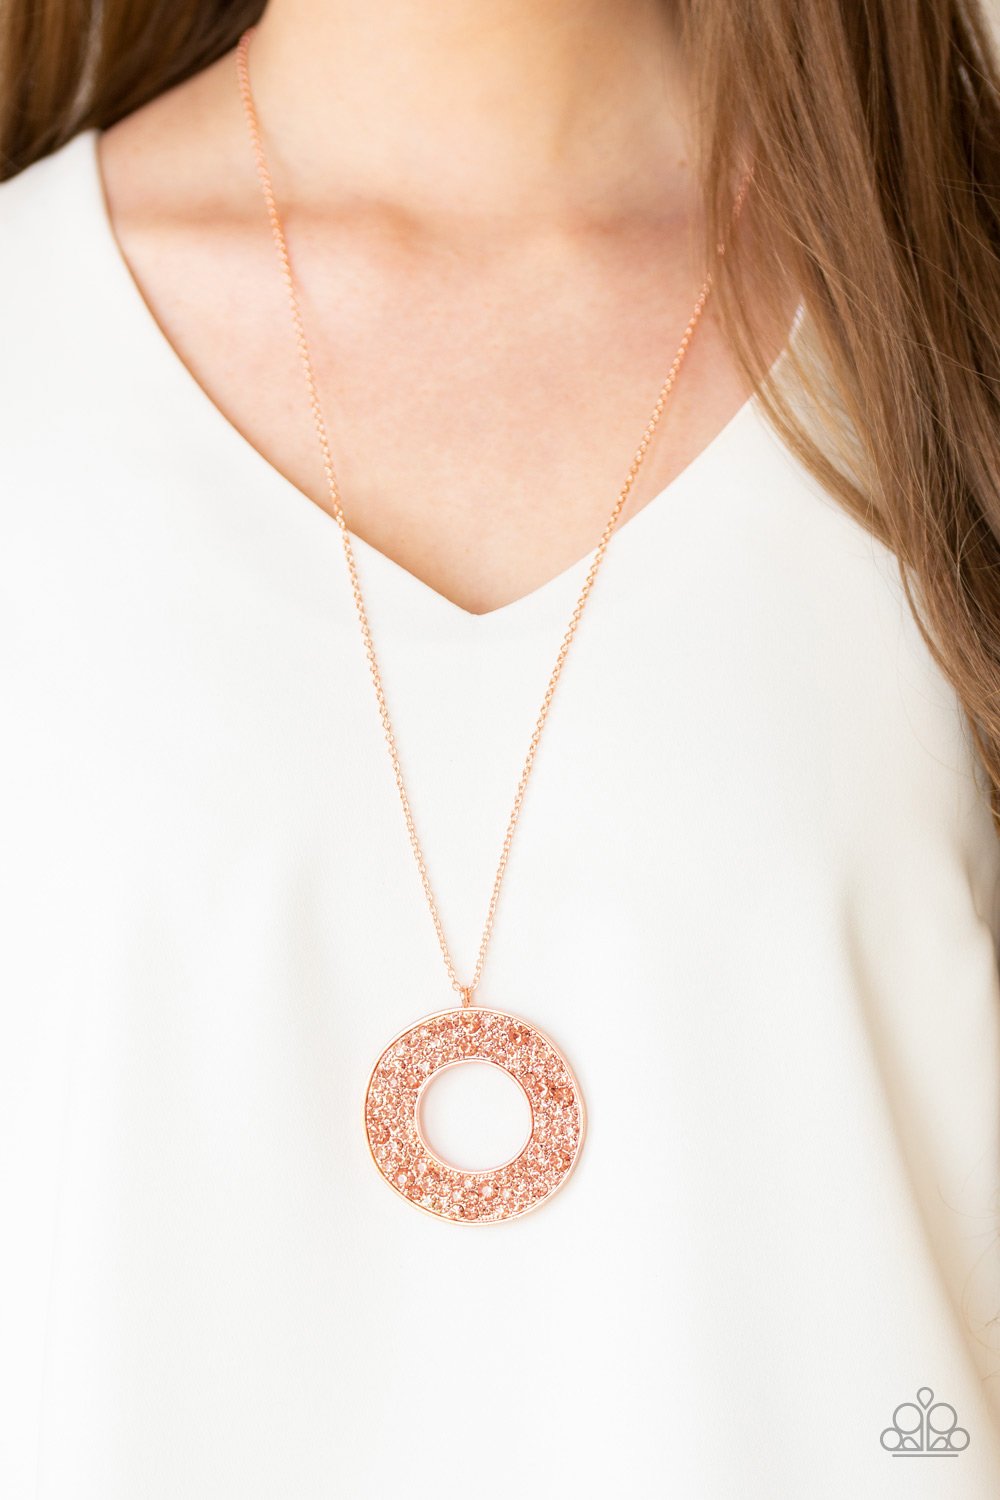 Bad HEIR Day-copper-Paparazzi necklace